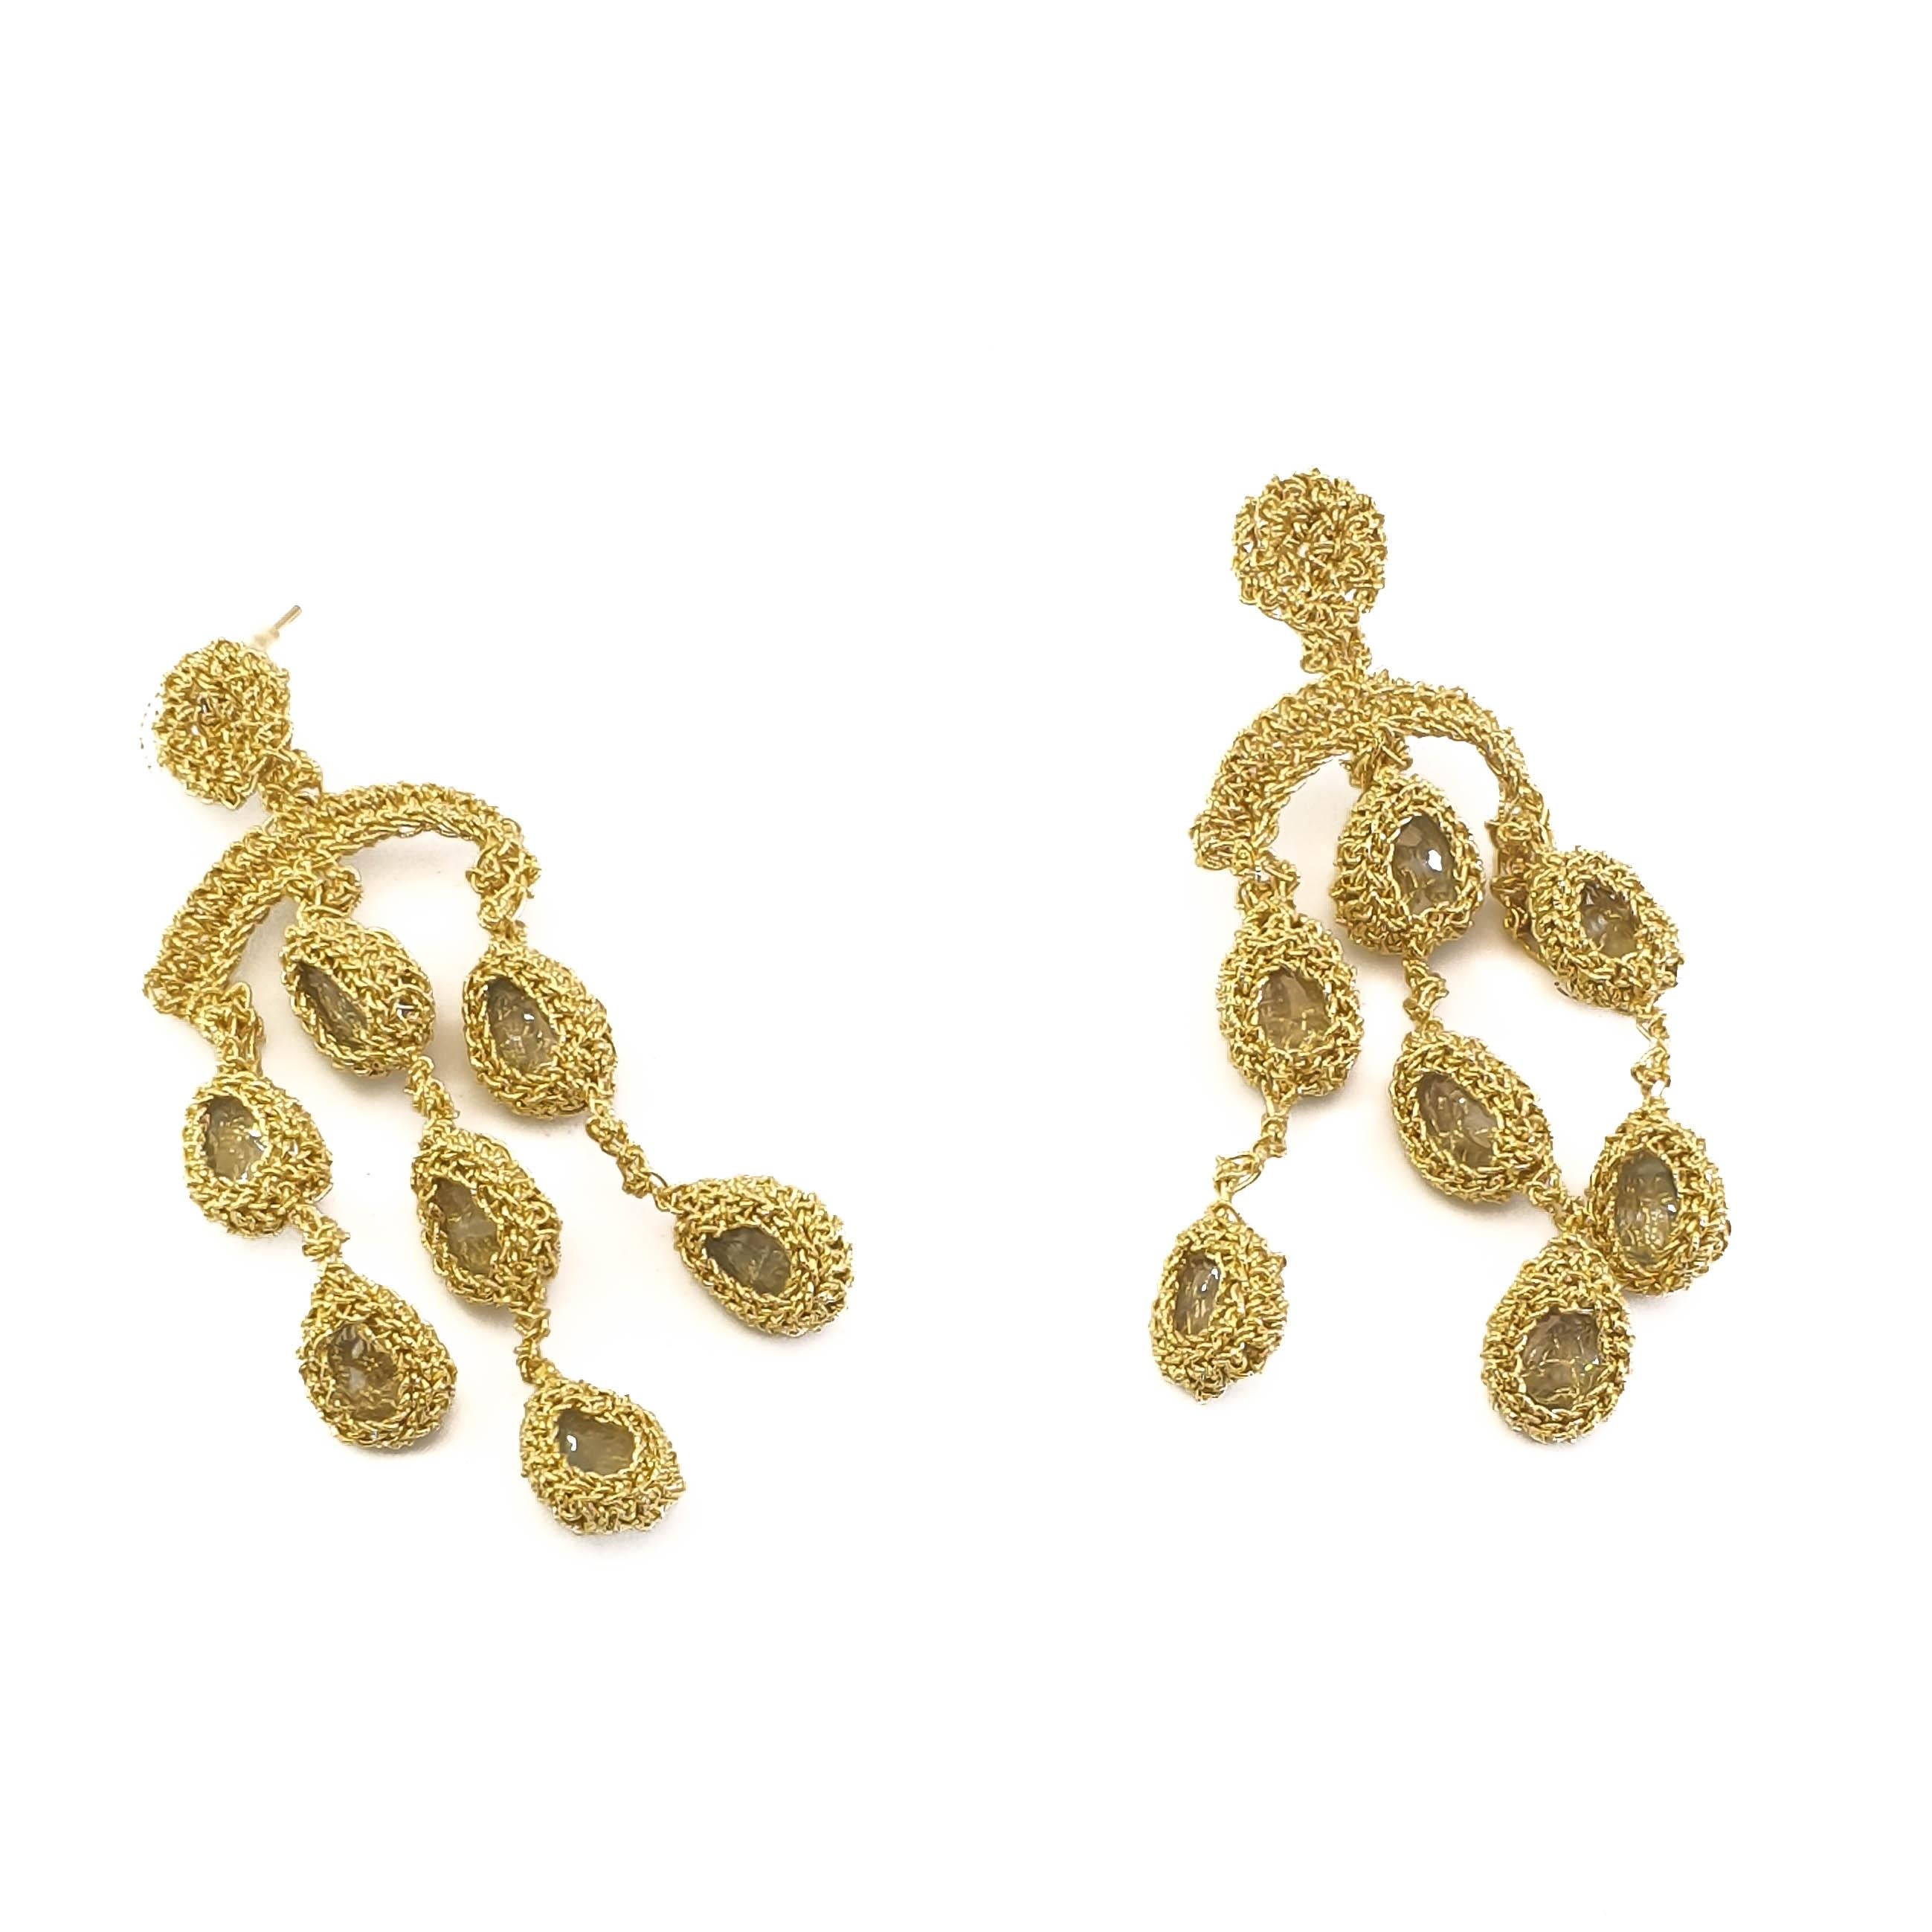 Beautifully crafted hand crochet gold thread (12.3 grams) earring with aquamarines (weighing in total 4.2 grams/21 carats. Elegant and Classic Chandelier earrings for everyday and special occasions.

Shenhav's inspiration comes from the world's